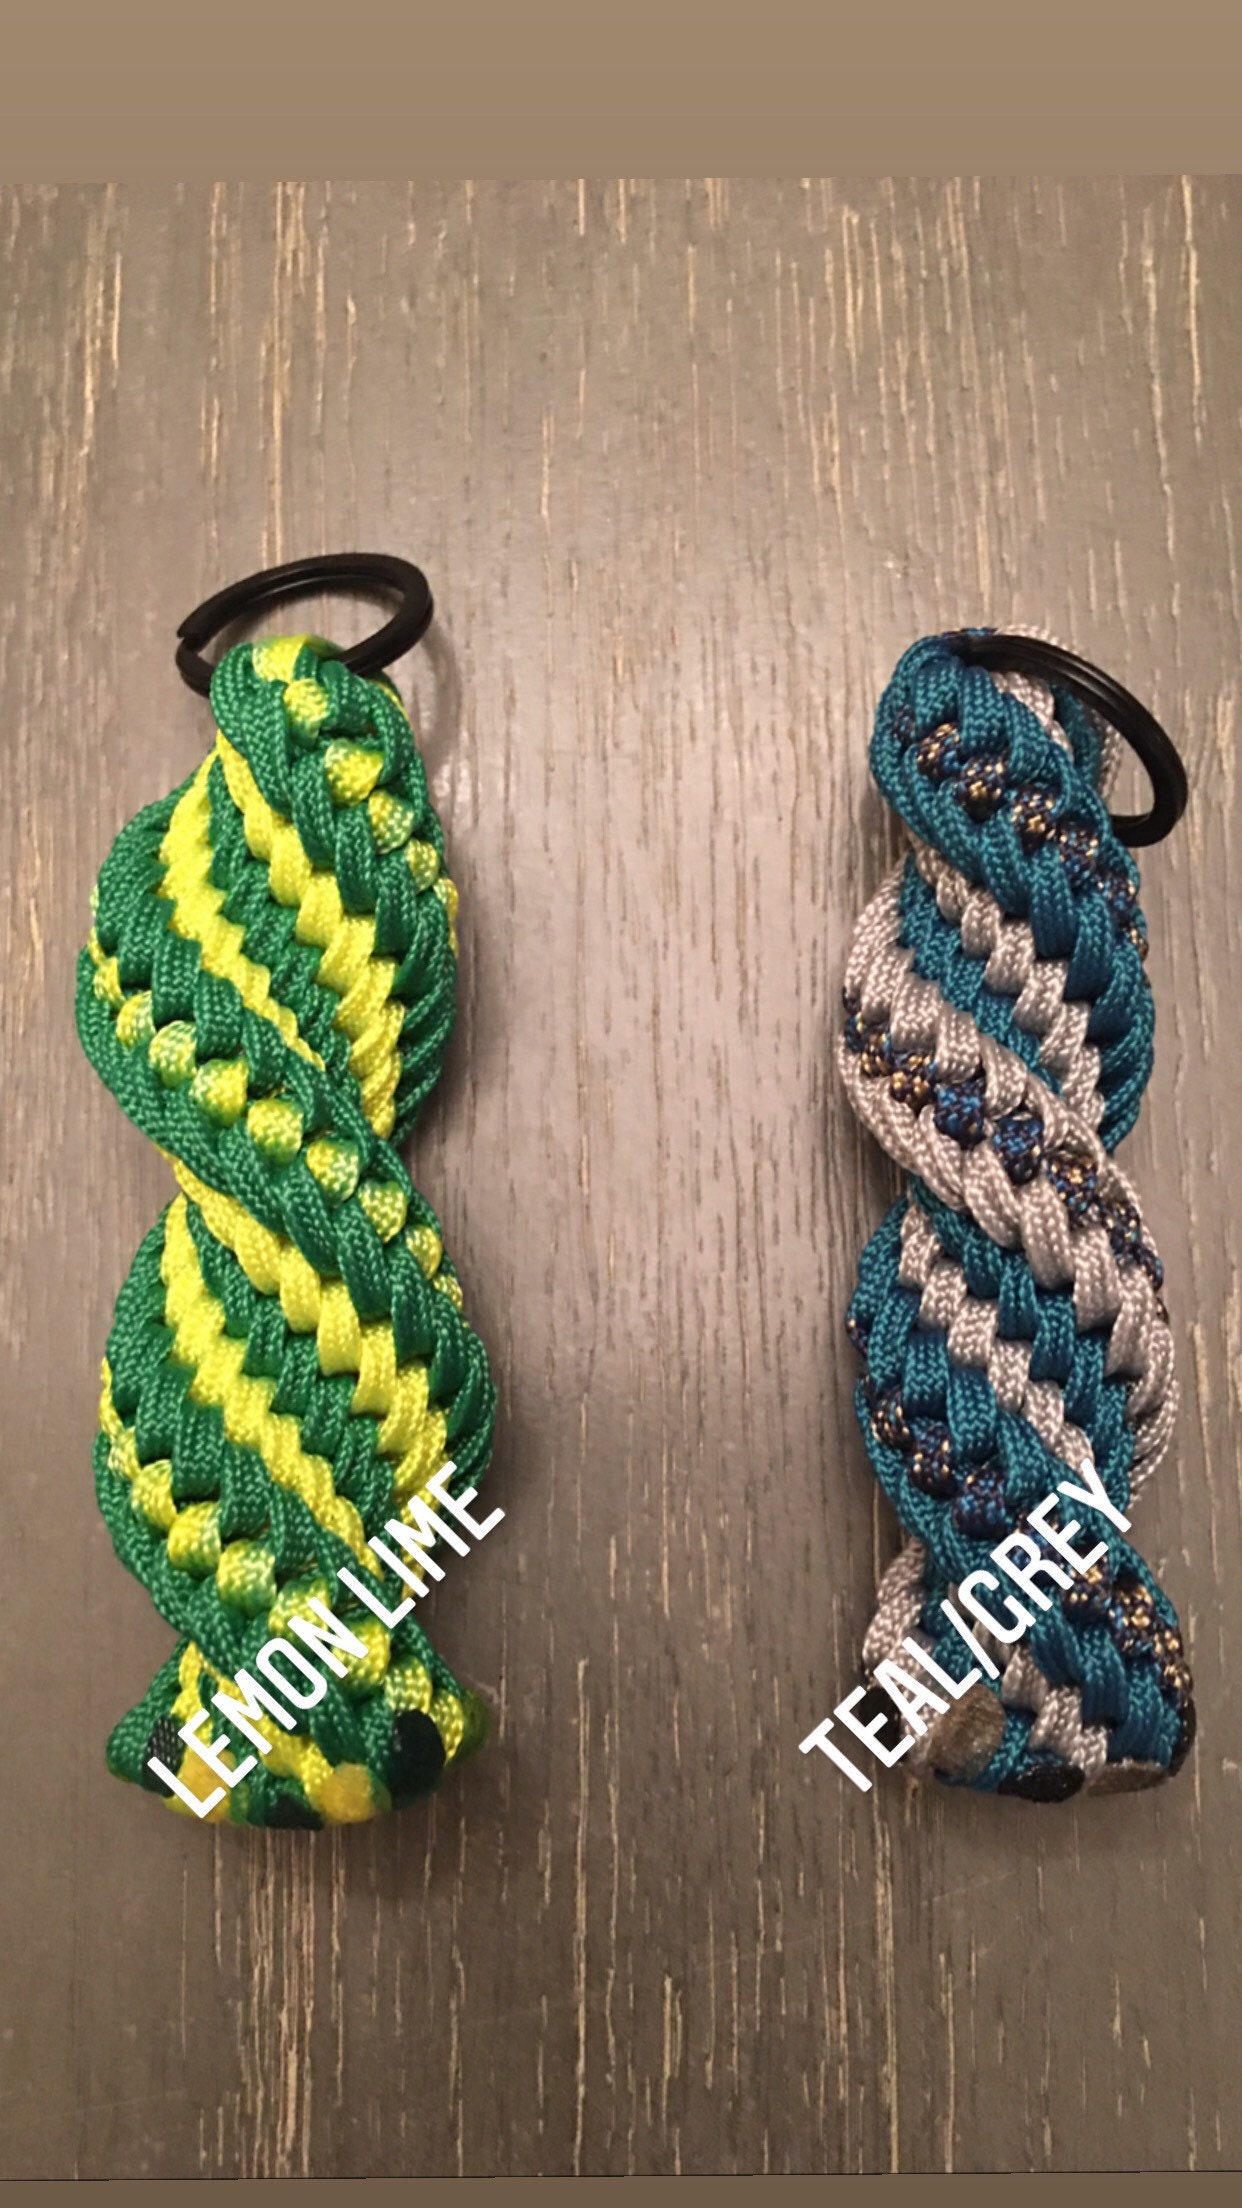 Details about   Texas Paracord Lanyard ID/Key Holder. 